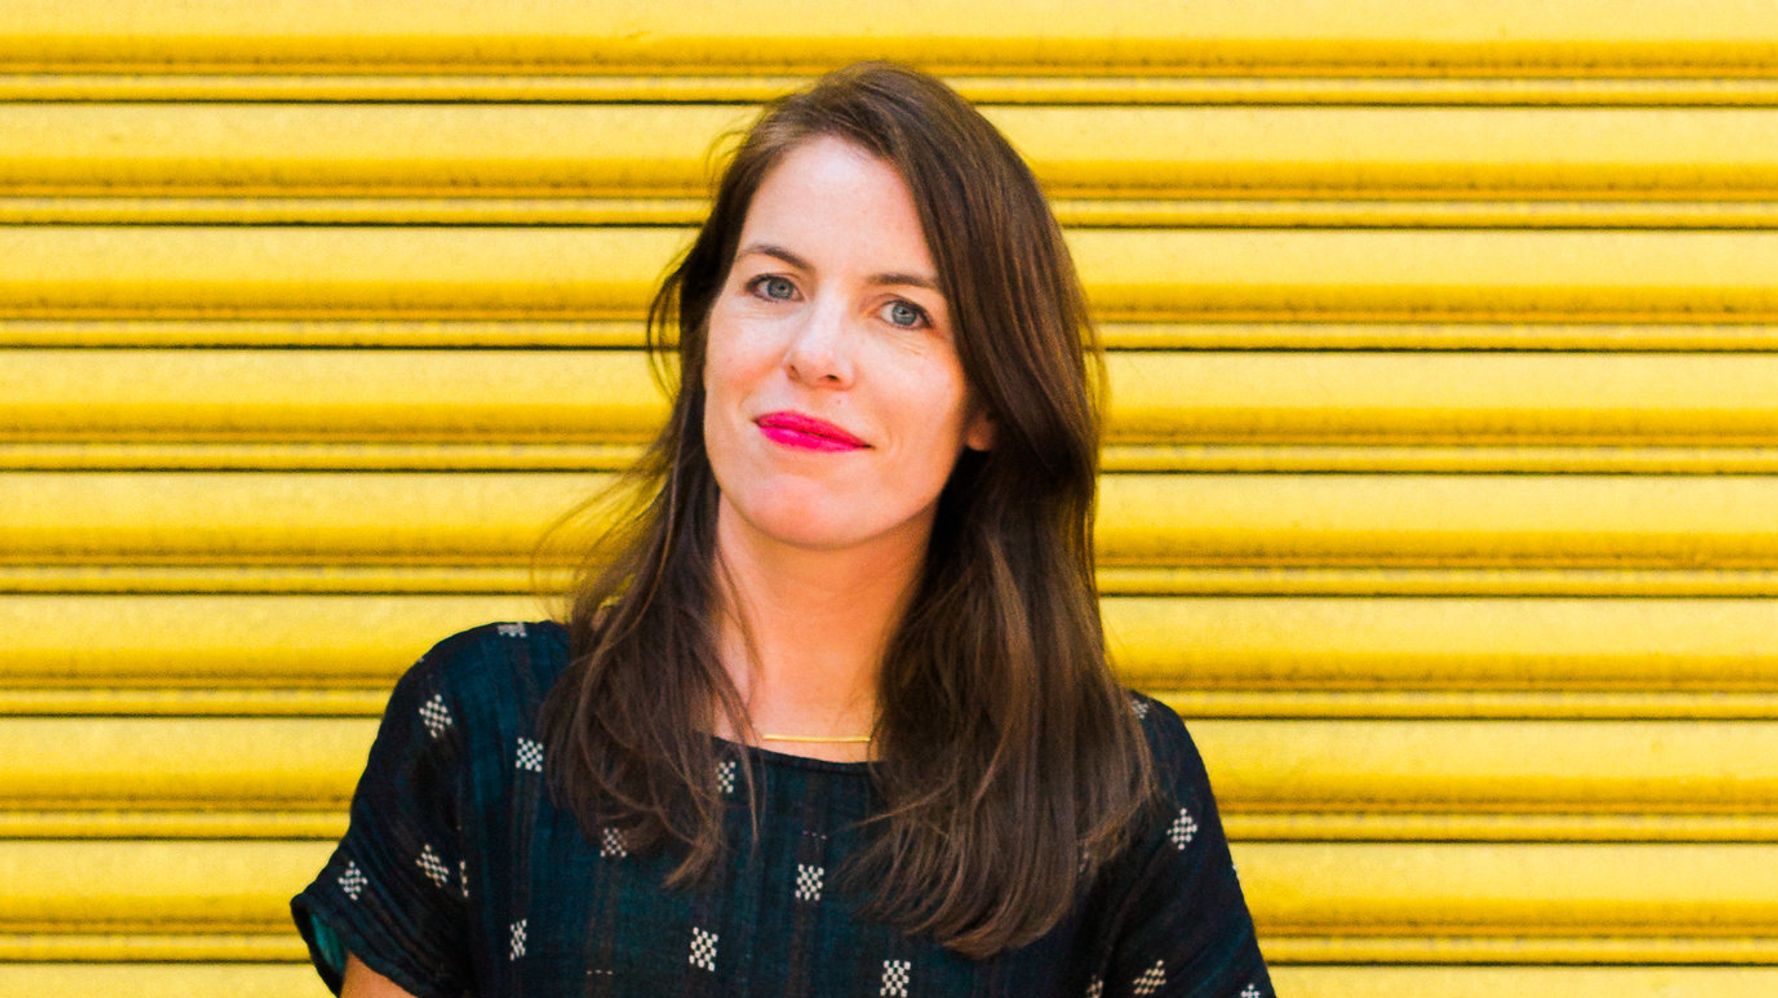 Cup of Jo Founder Joanna Goddard on Career and Honesty